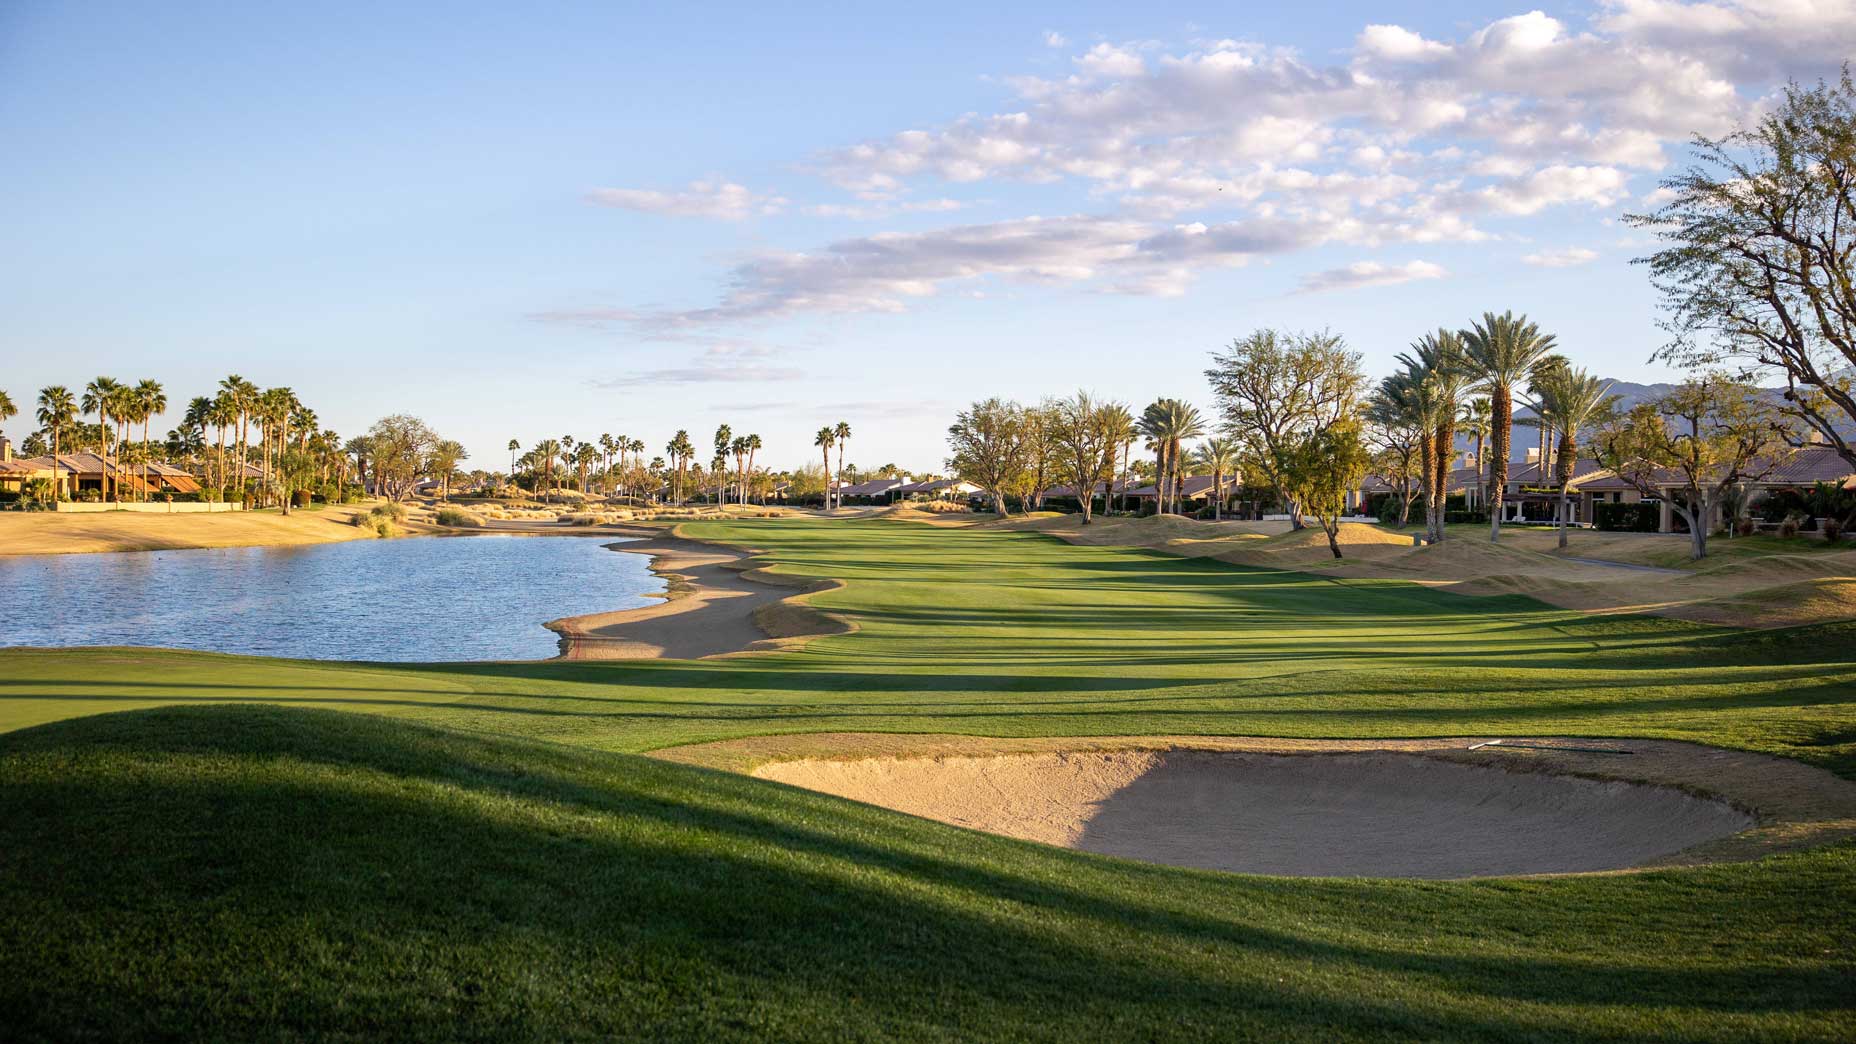 A general view of the 18th fairway during the first round of The American Express PGA Tournament on January 21, 2021, at PGA West Nicklaus Tournament Course in La Quinta, CA